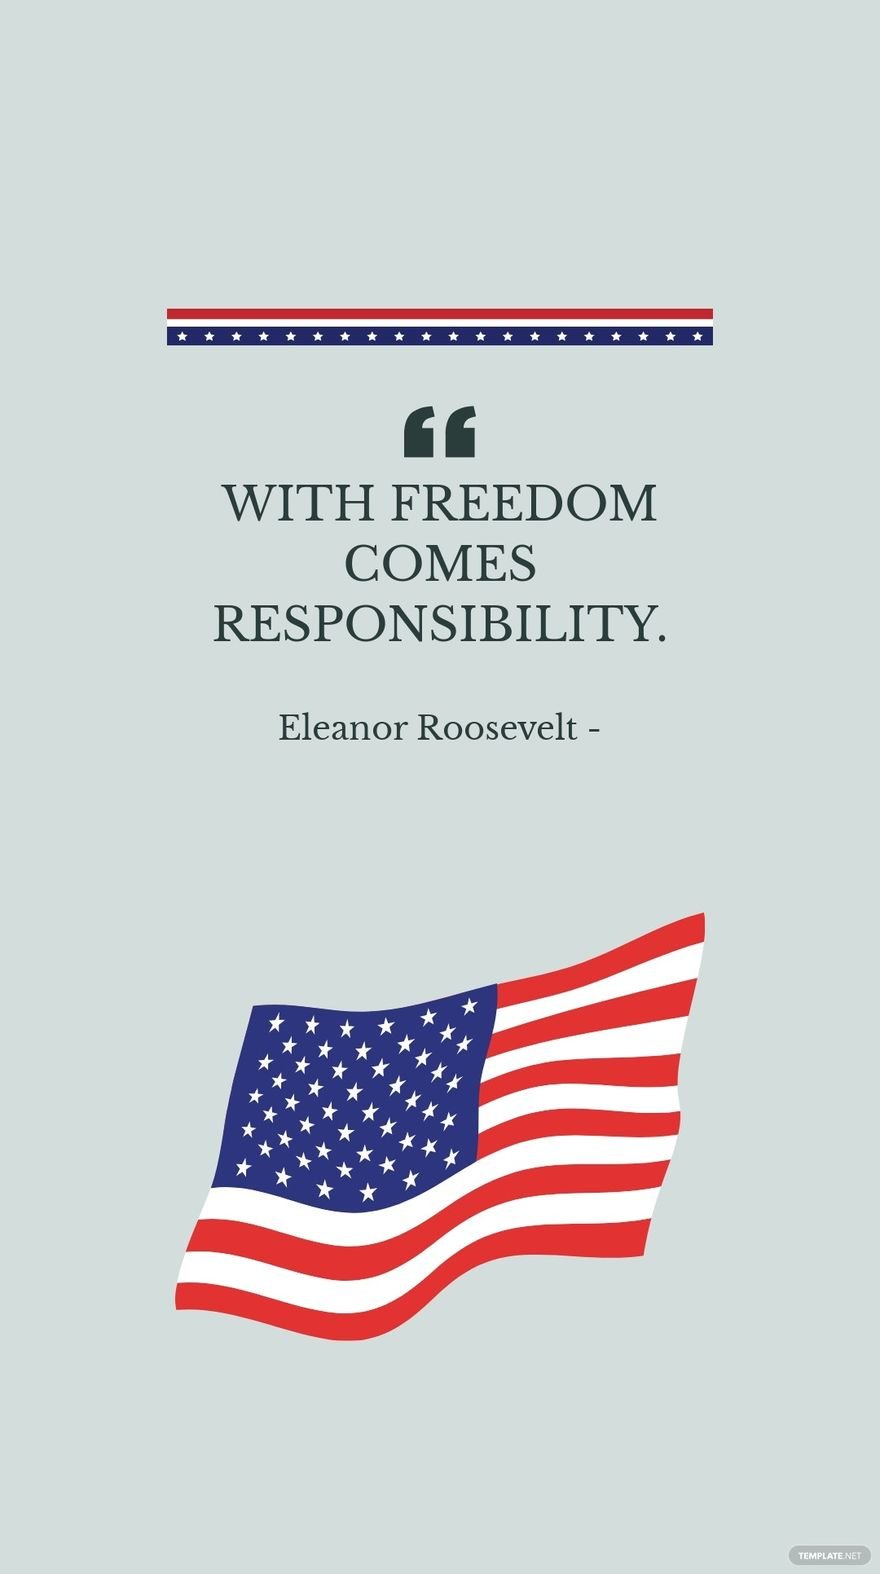 Eleanor Roosevelt - With freedom comes responsibility.